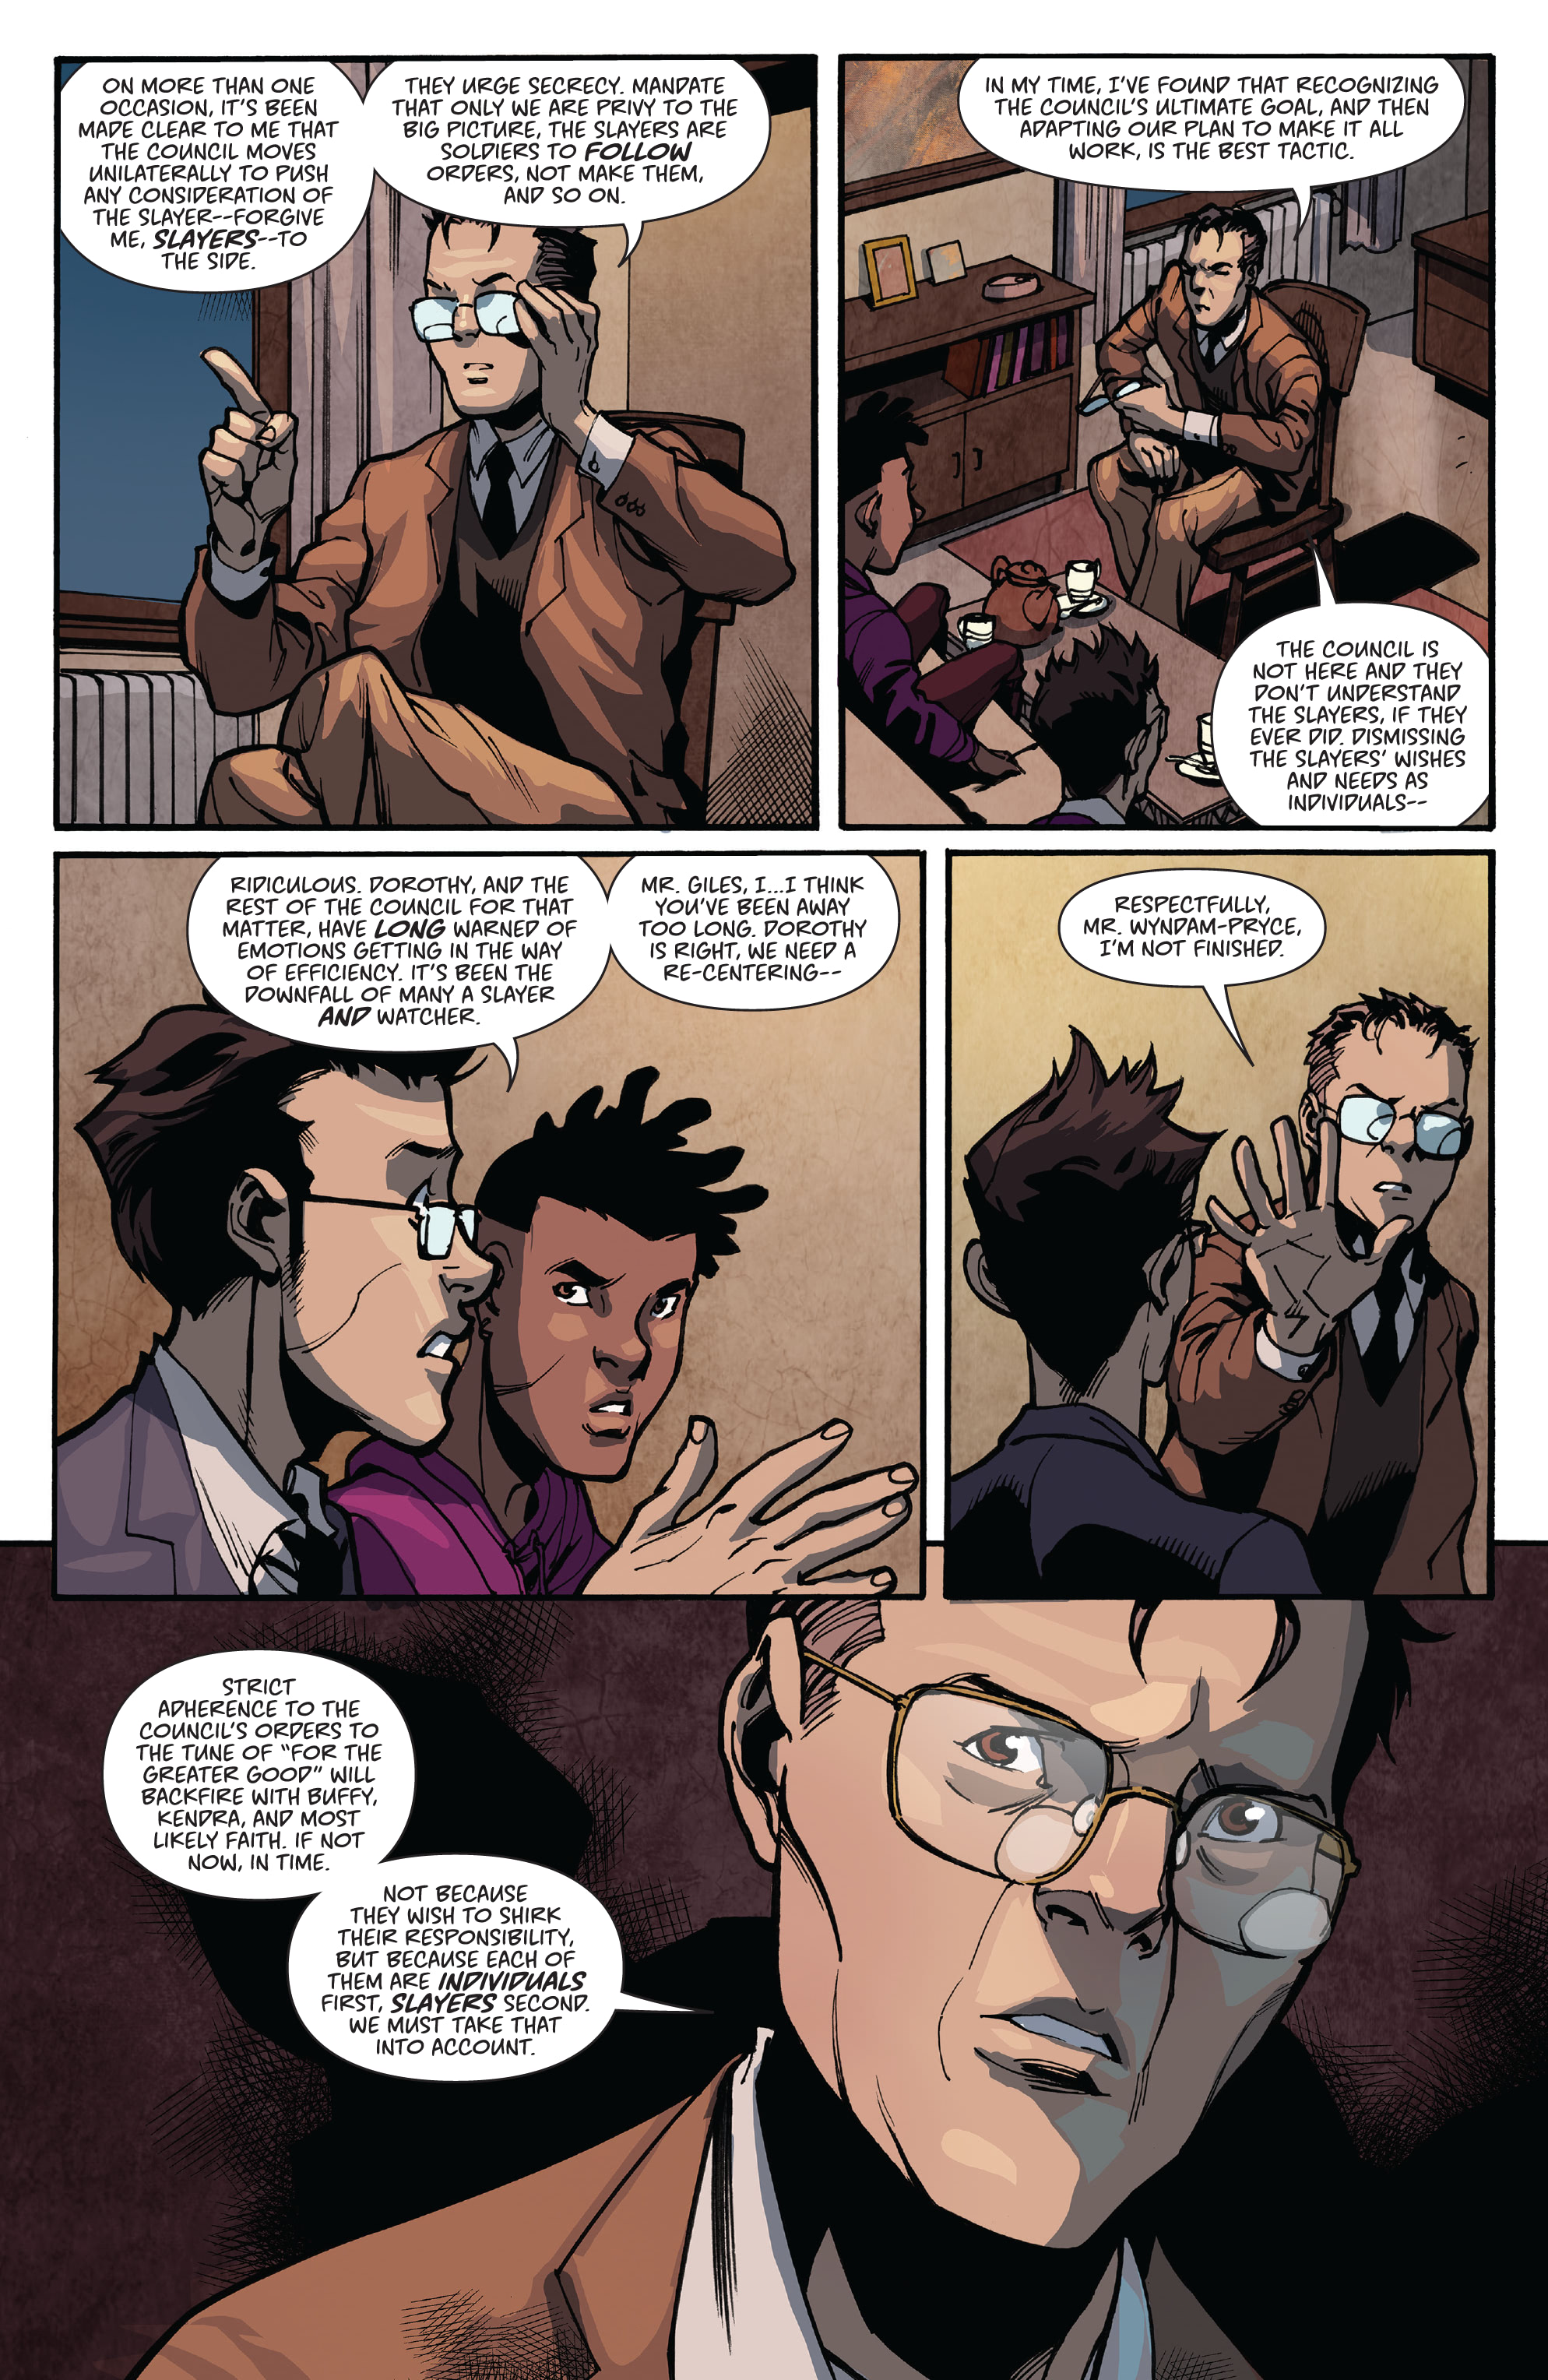 Buffy The Vampire Slayer 2019 Chapter 22 Page 13 1065